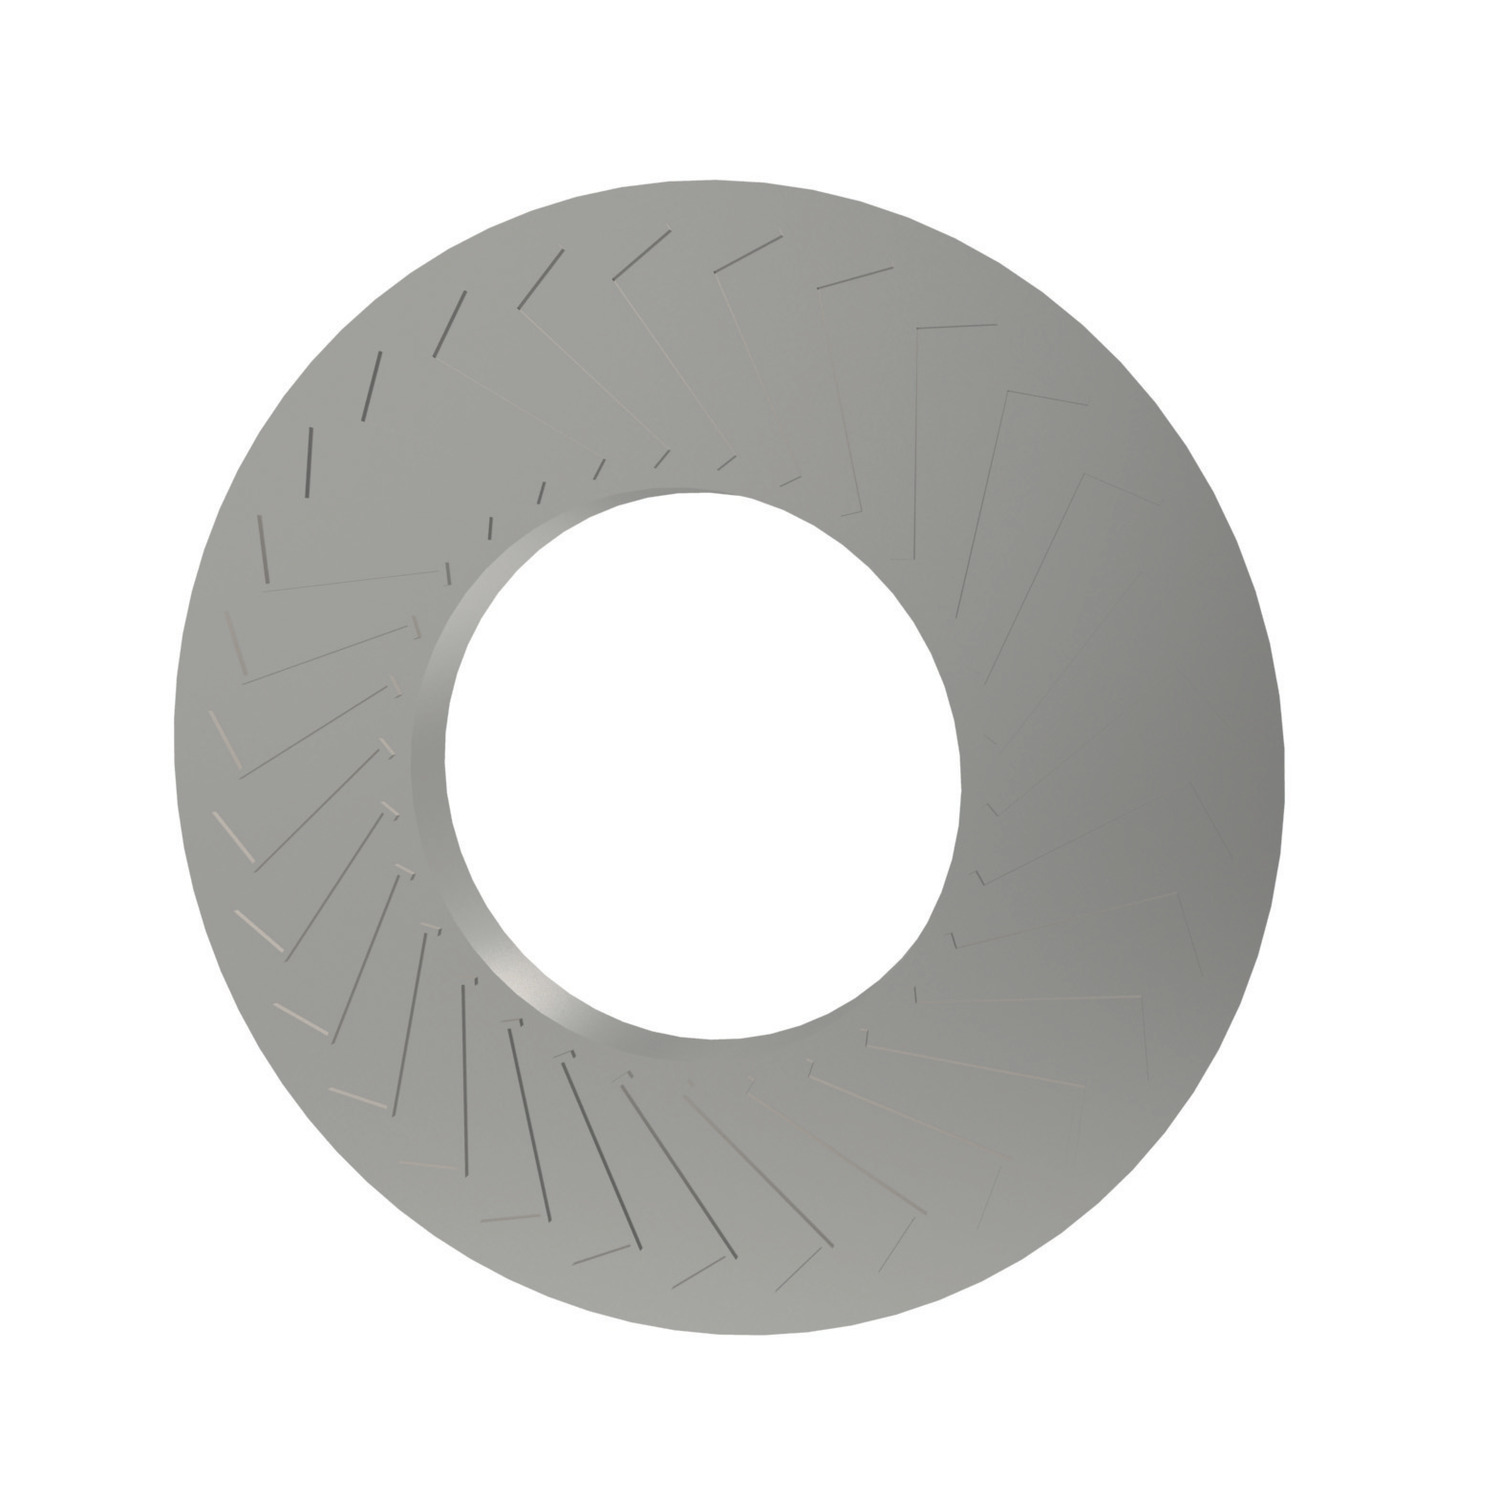 Safety Washers Disc spring styled washers designed to provide a locking effect through friction. Suitable for vibration damping or resisting the effects of heat expansion.